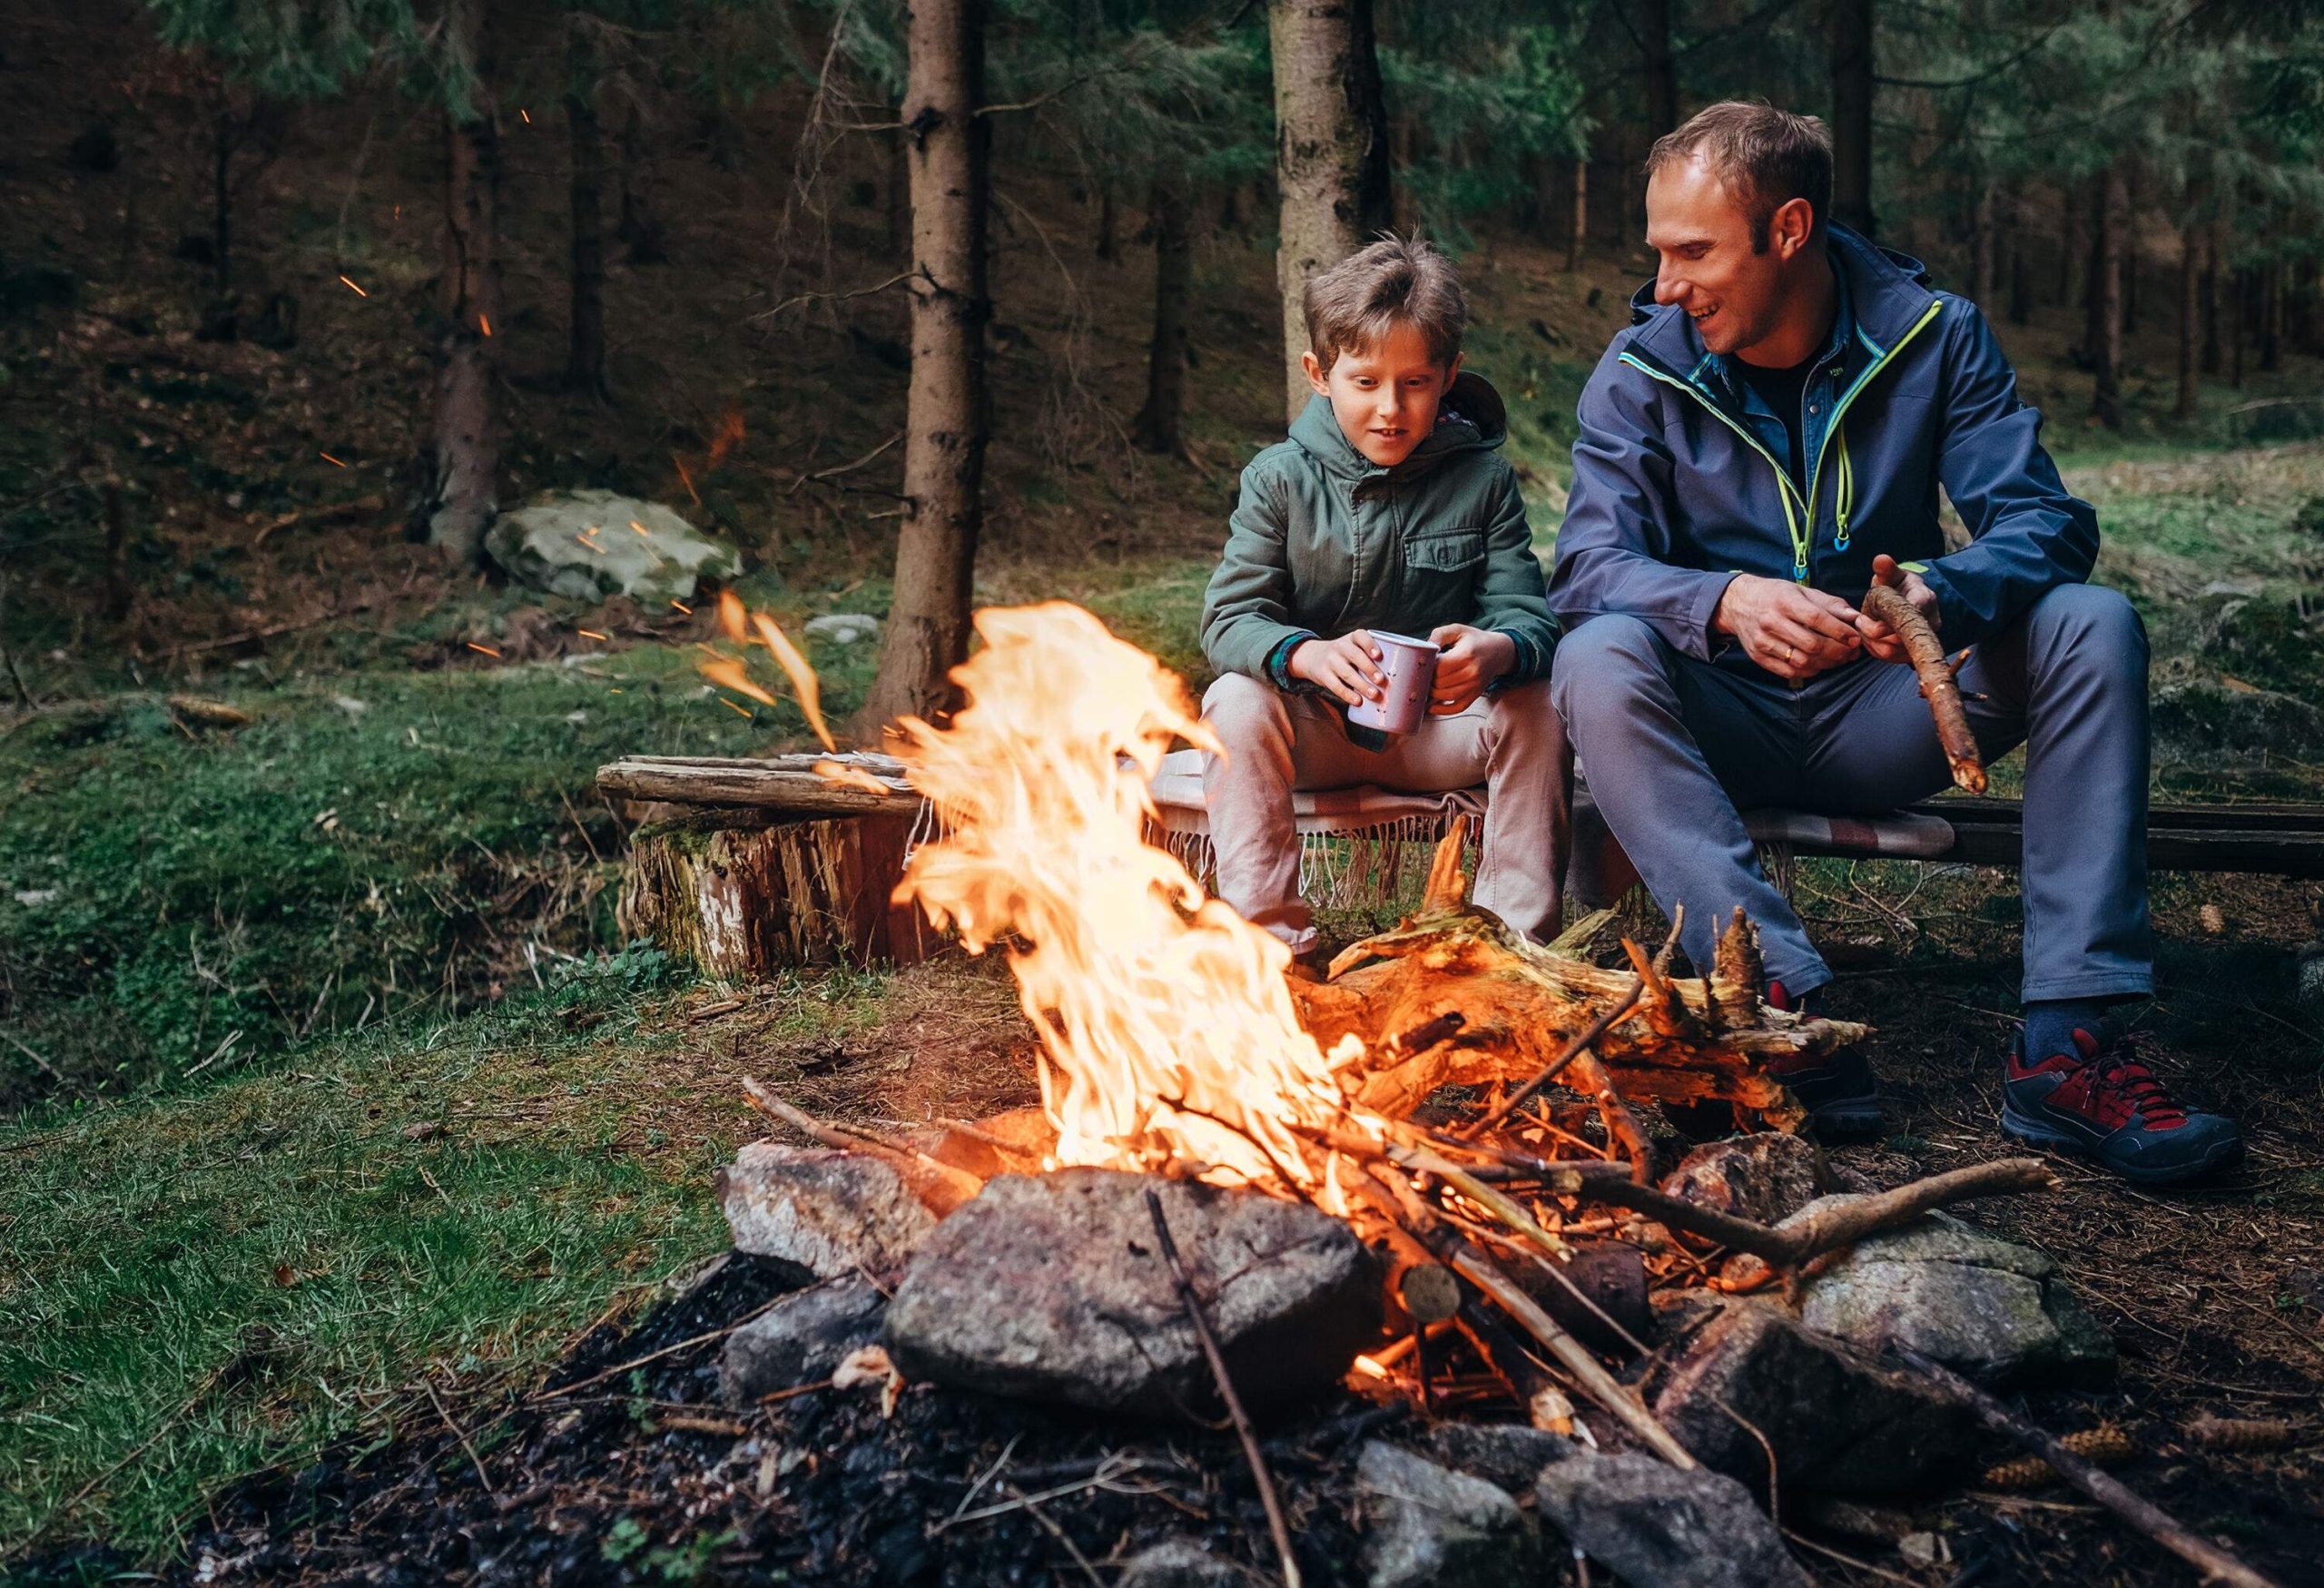 Father and son converse while sitting in front of a bonfire in the woods.